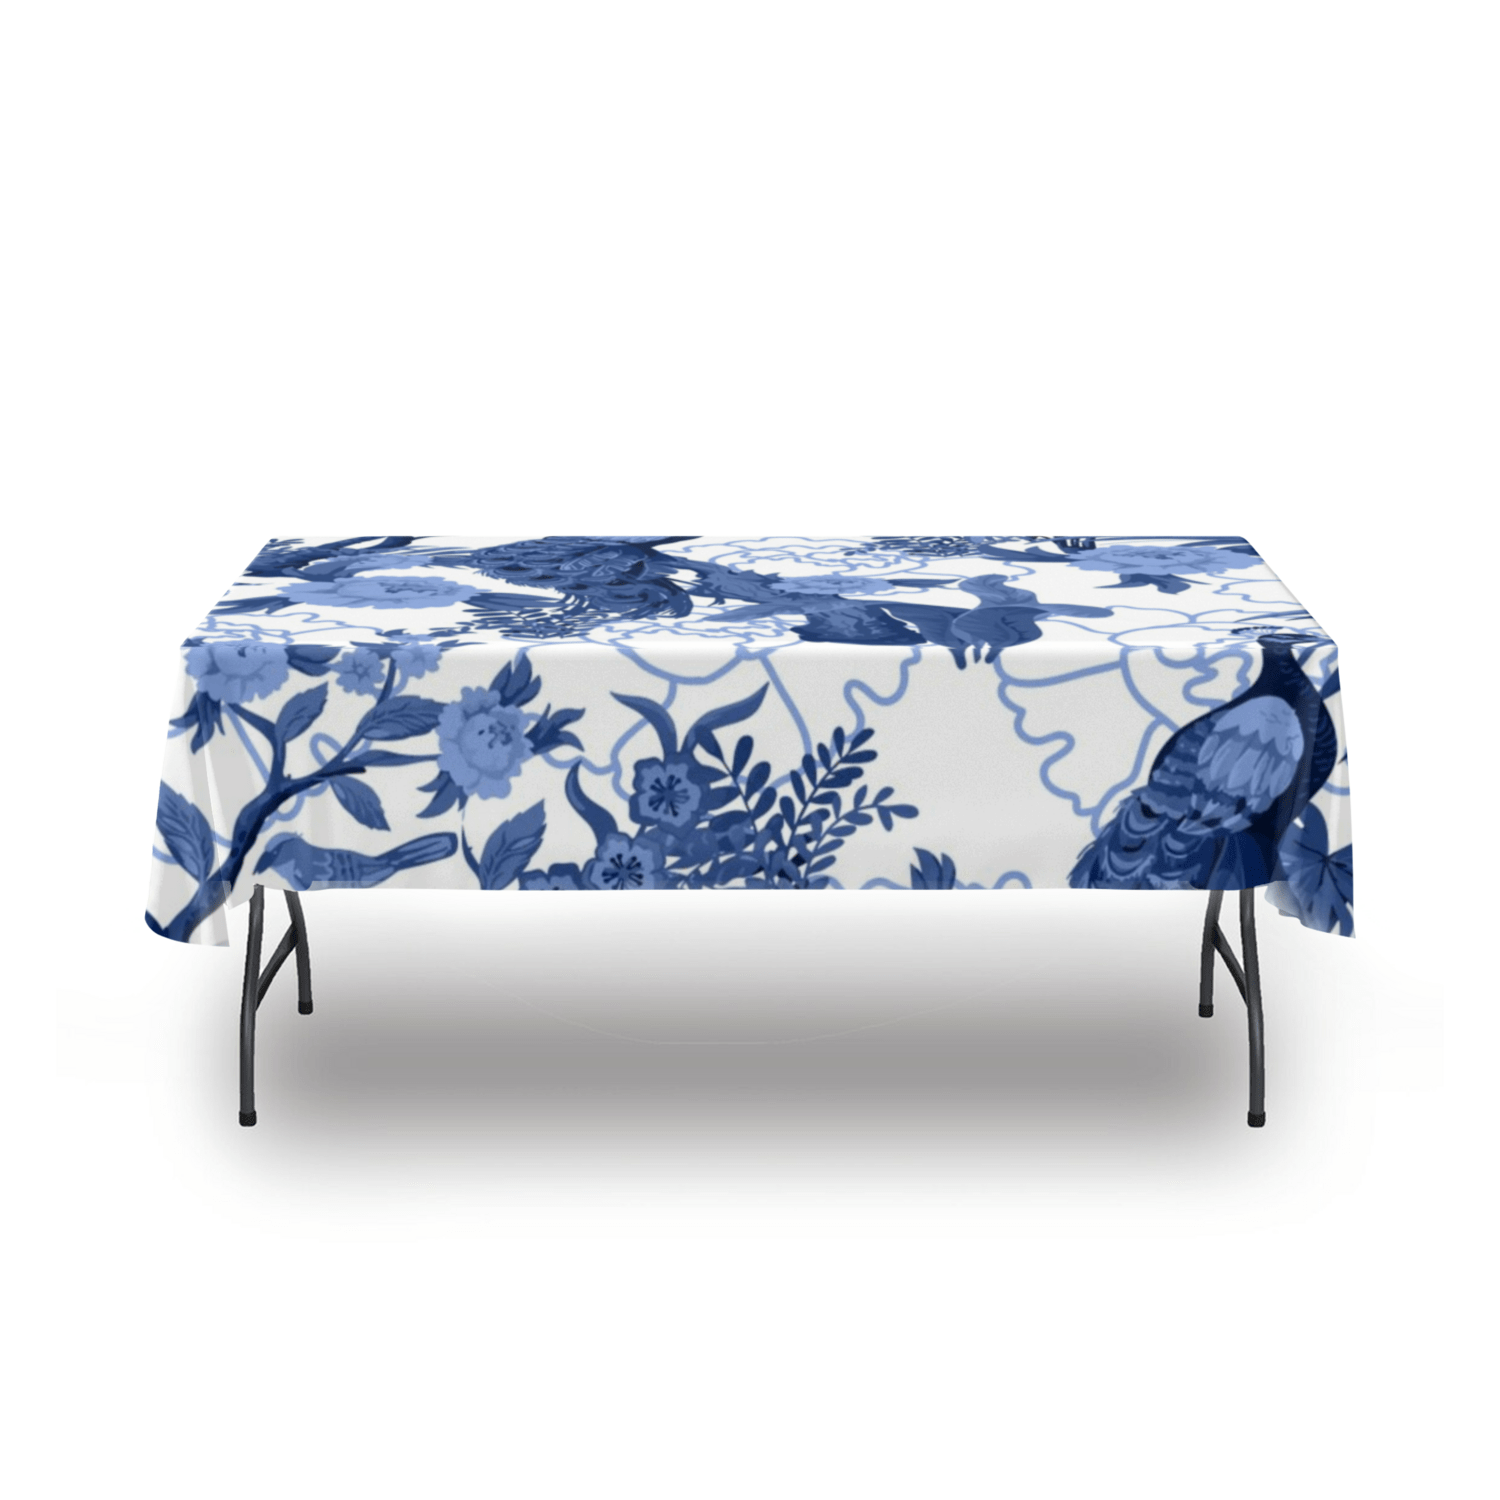 kate-mcenroe-nyc Chinoiserie Blue Peacock Tablecloth, Elegant Floral Bird Design, Classic Table Linen Tablecloths 54&quot; x 54&quot; 100227